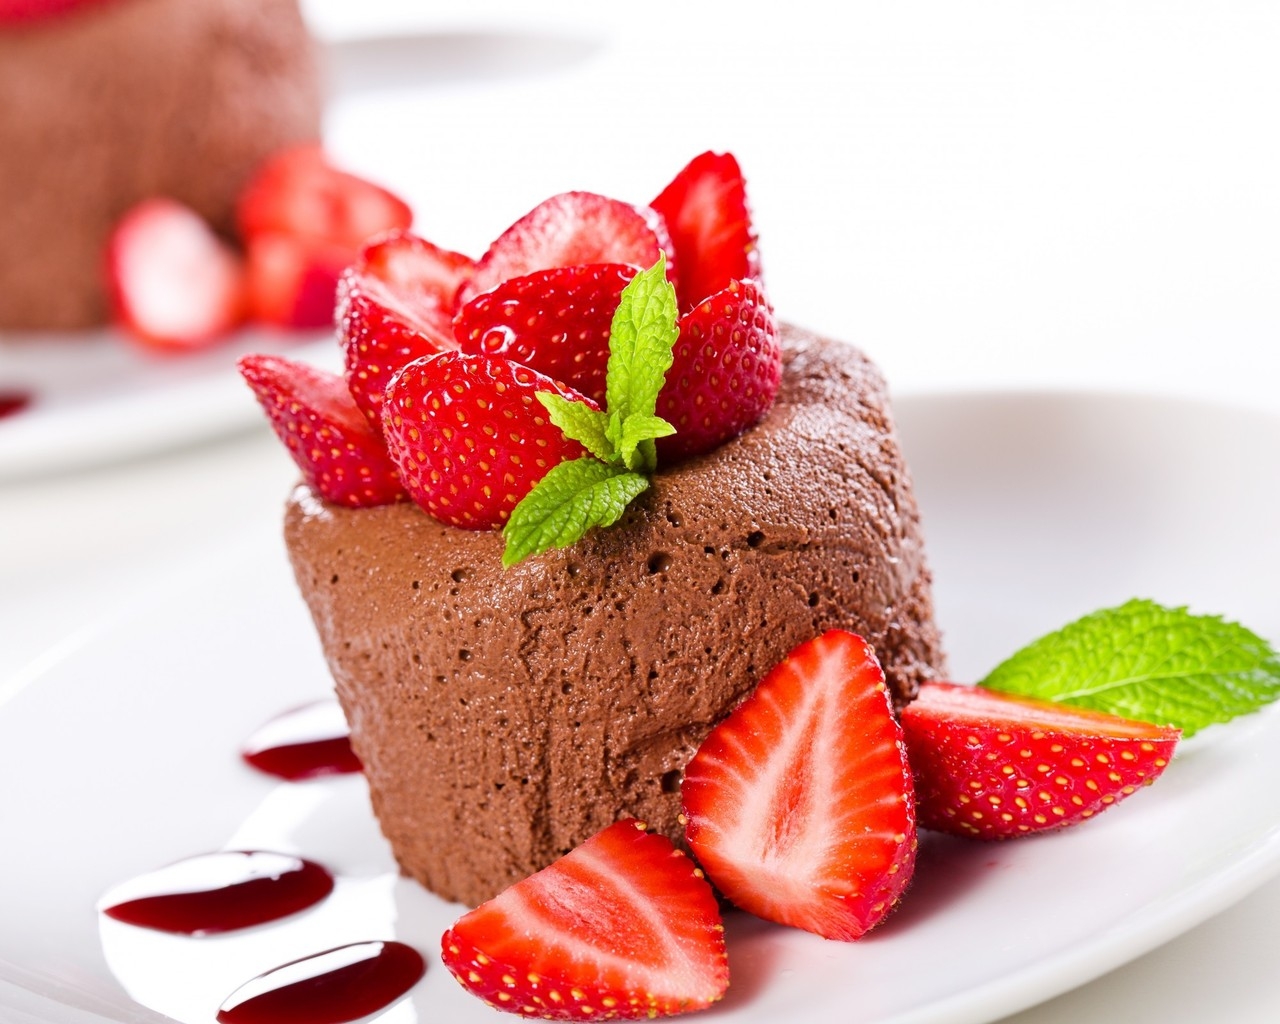 Chocolate Mousse for 1280 x 1024 resolution